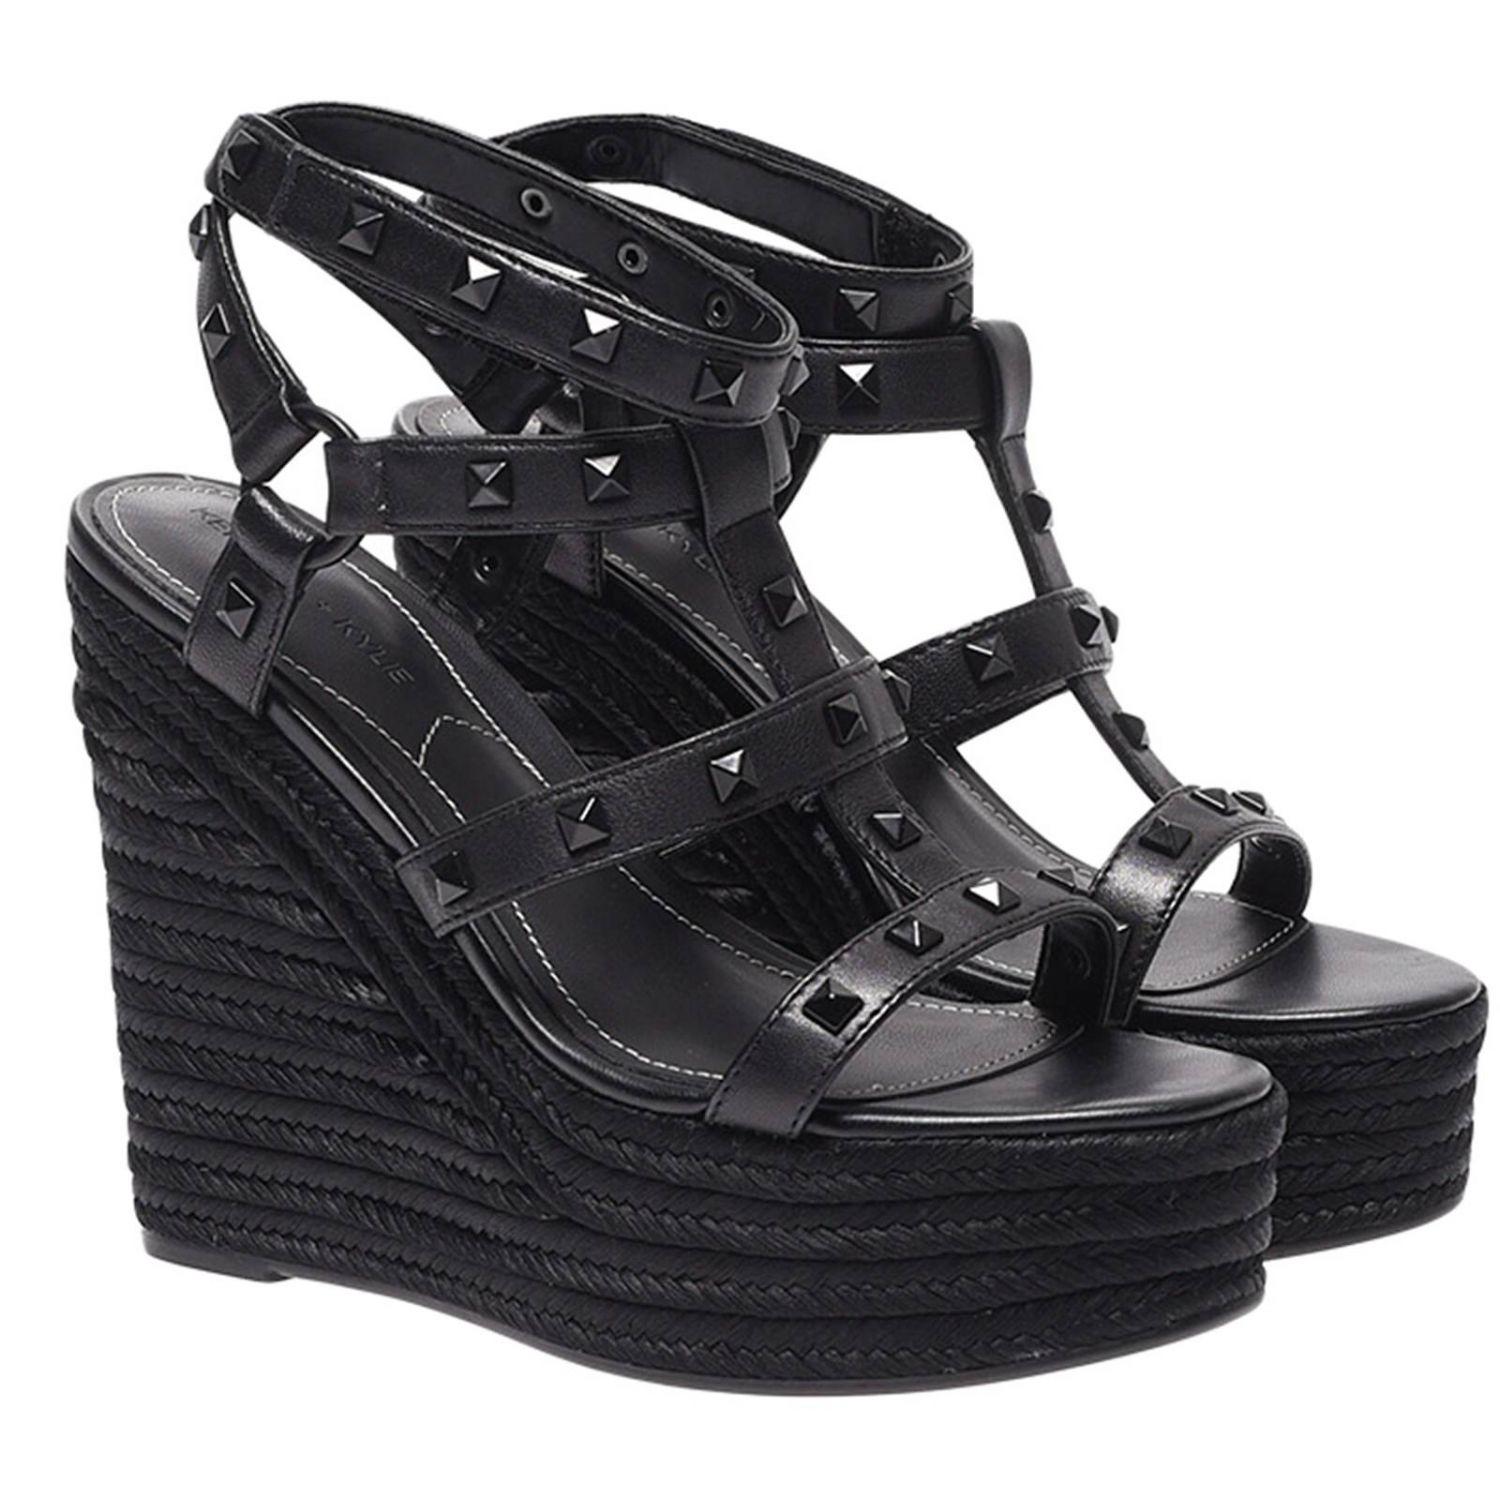 Kendall + Kylie Leather Wedge Shoes Shoes Women in Black - Lyst